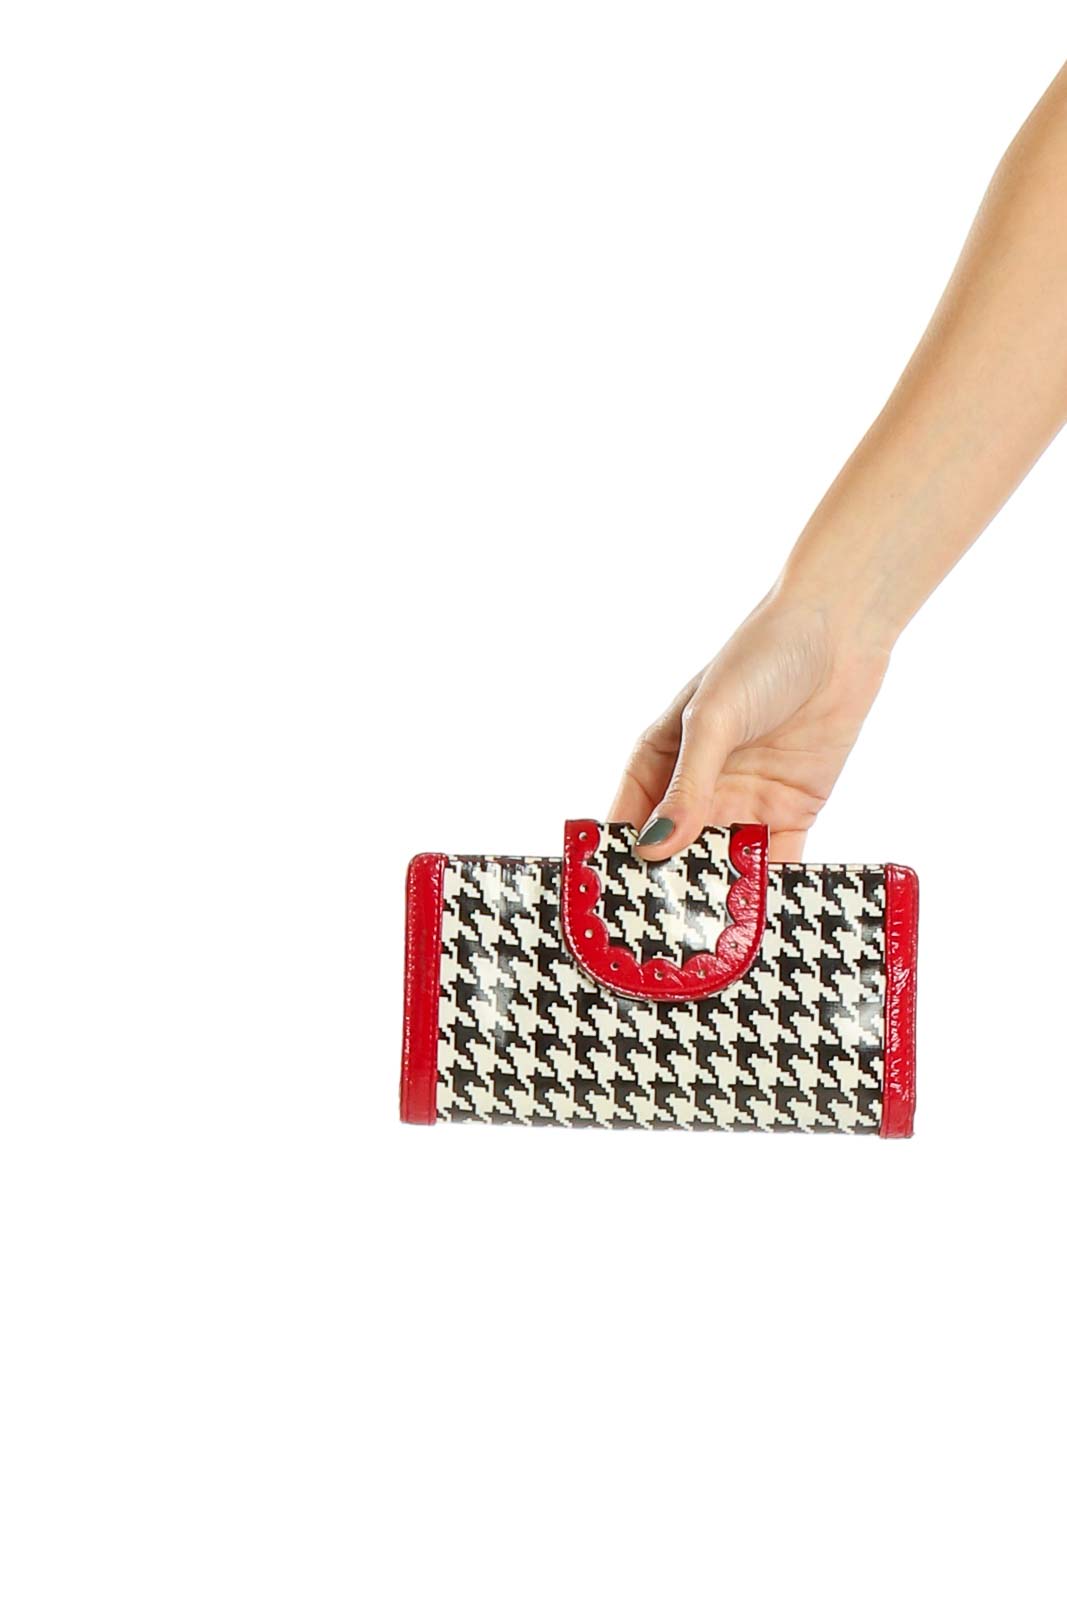 Black White Red Houndstooth Clutch Front